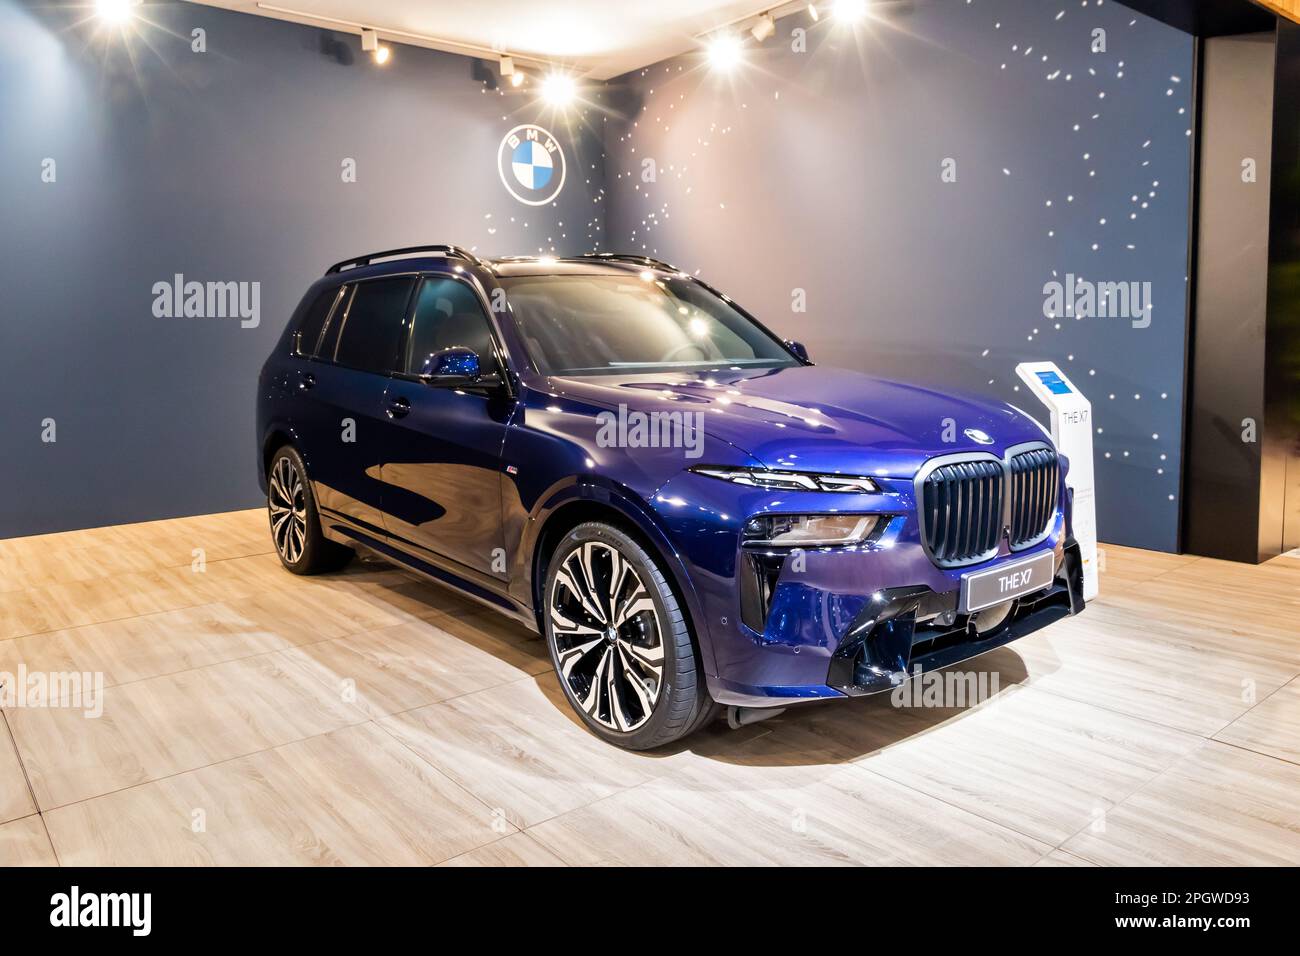 BMW X7 (G07) luxury SUV car presented at the Brussels Autosalon European  Motor Show. Brussels, Belgium - January 13, 2023 Stock Photo - Alamy